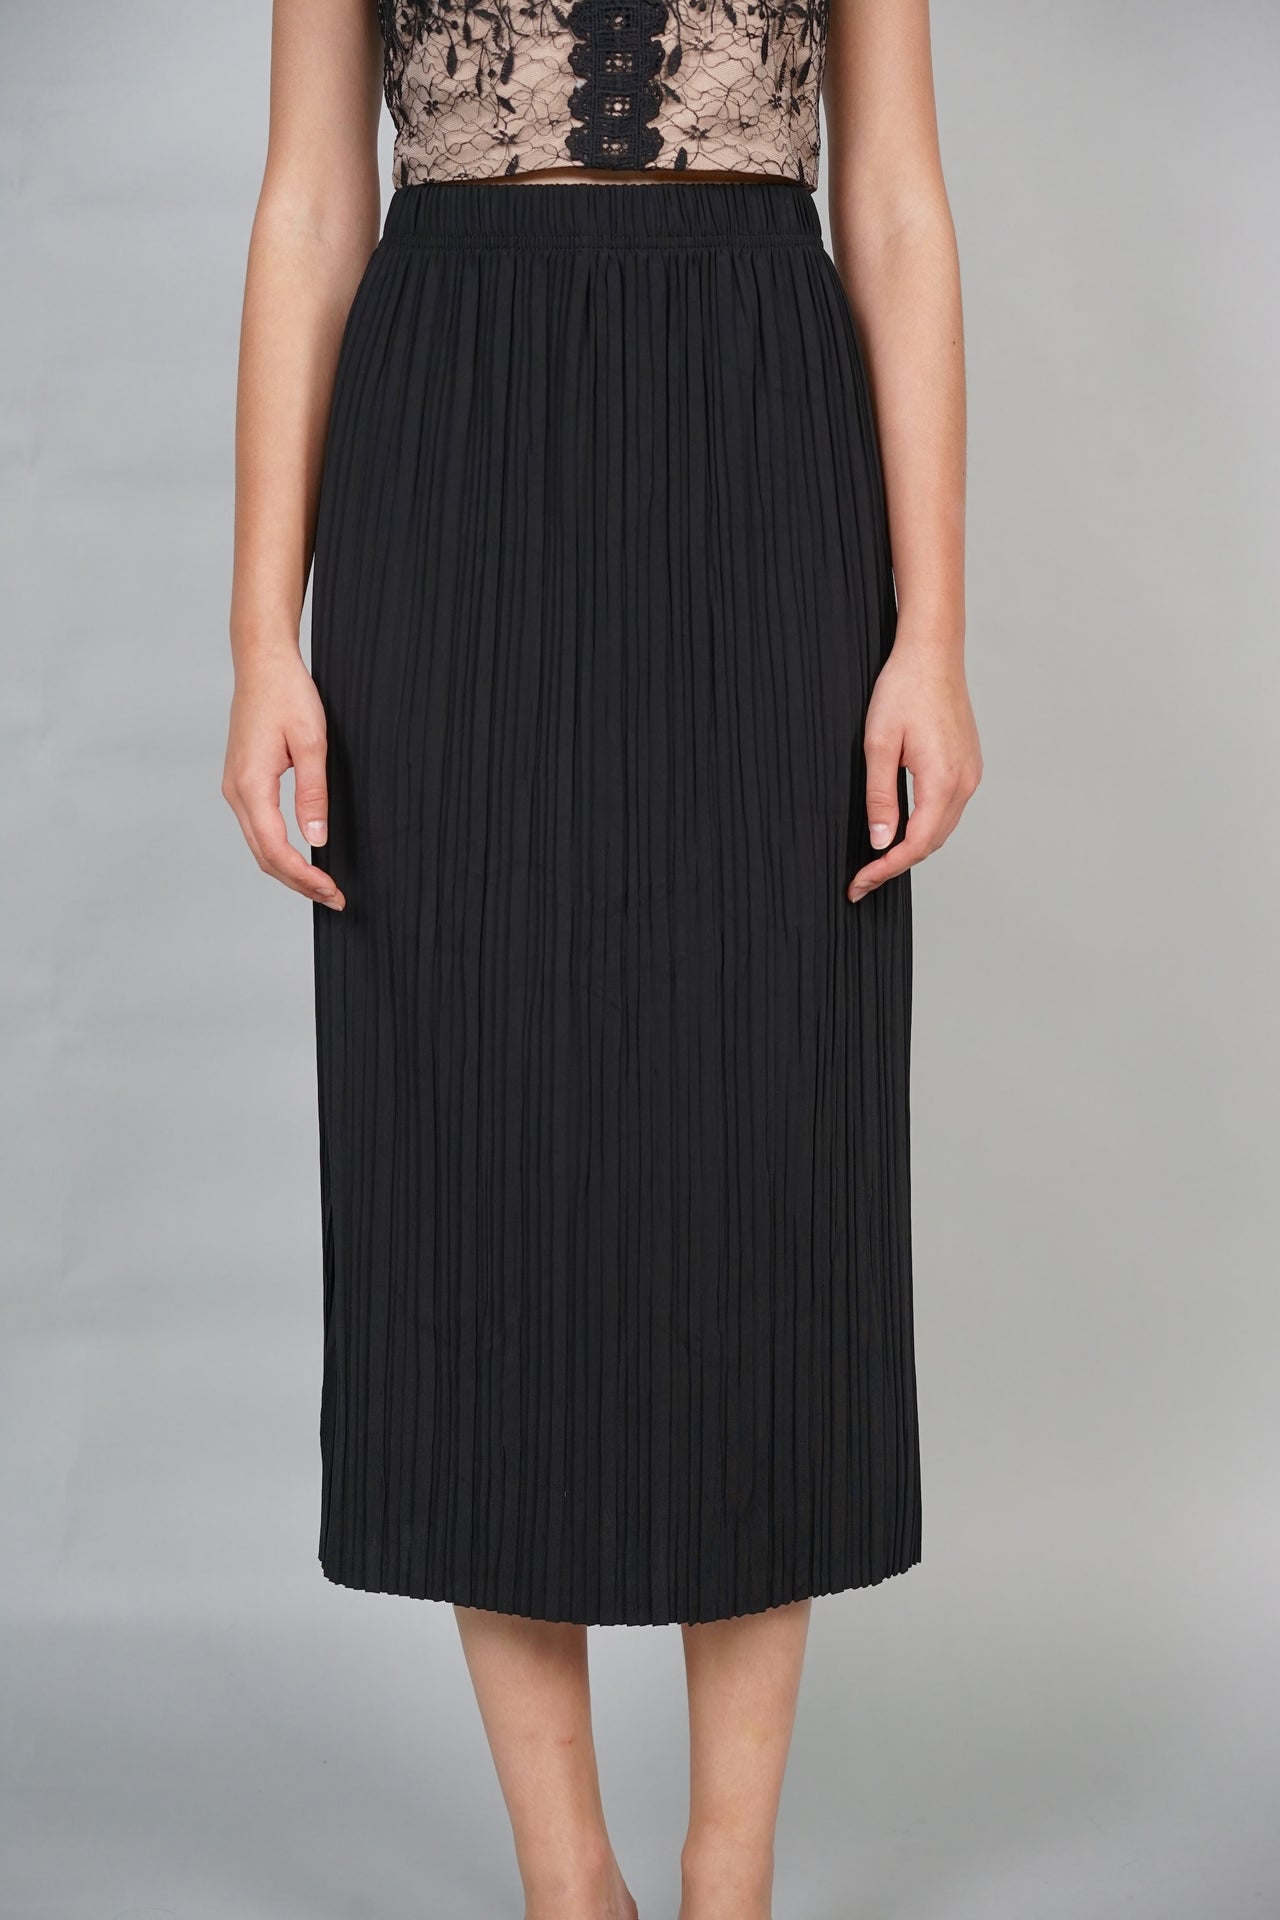 EVERYDAY / Leif Pleated Skirt in Black